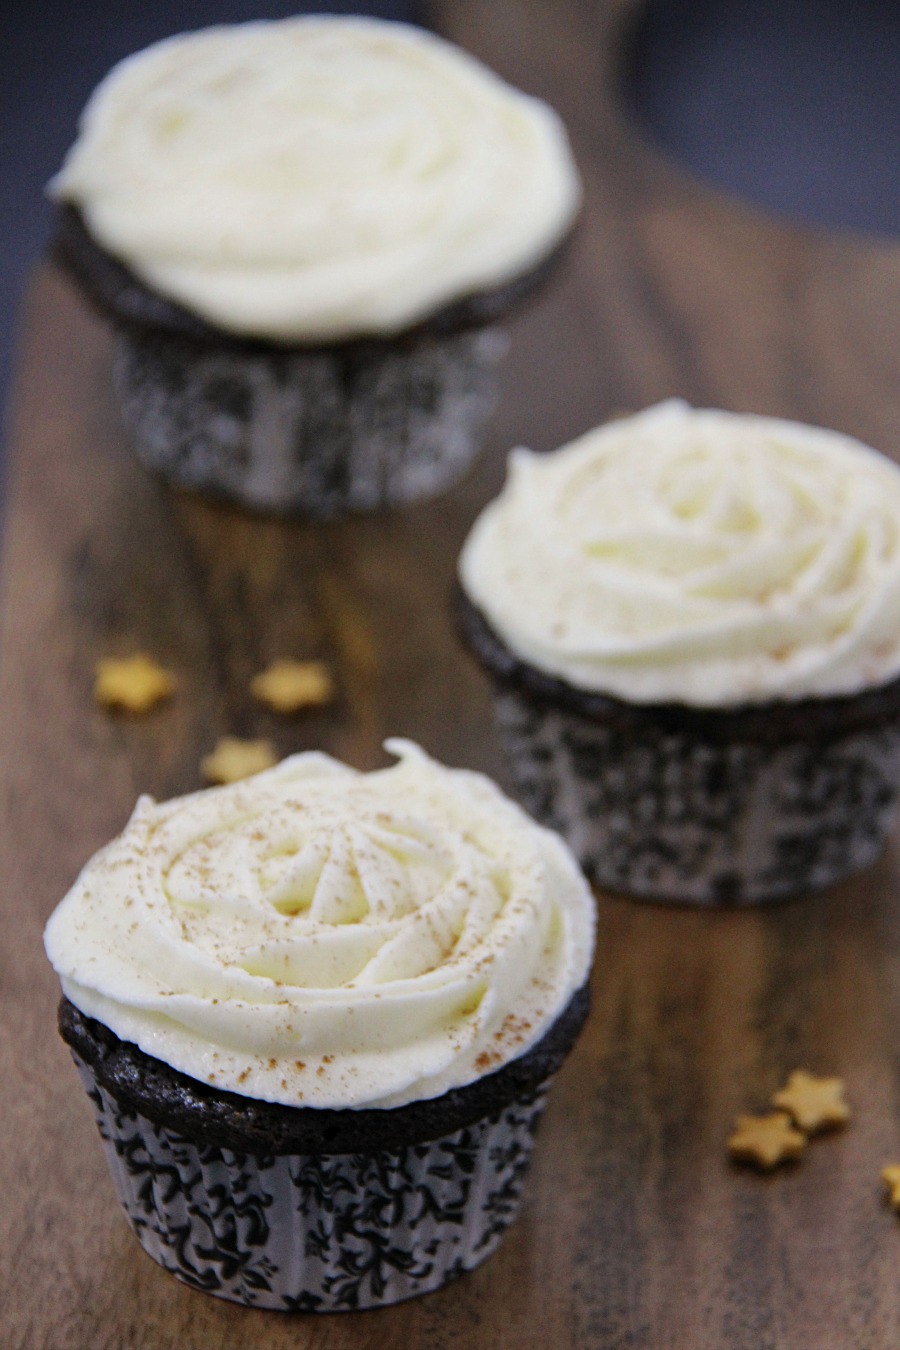 Chocolate Cupcakes with Eggnog Buttercream Frosting recipe from Family Food and Travel